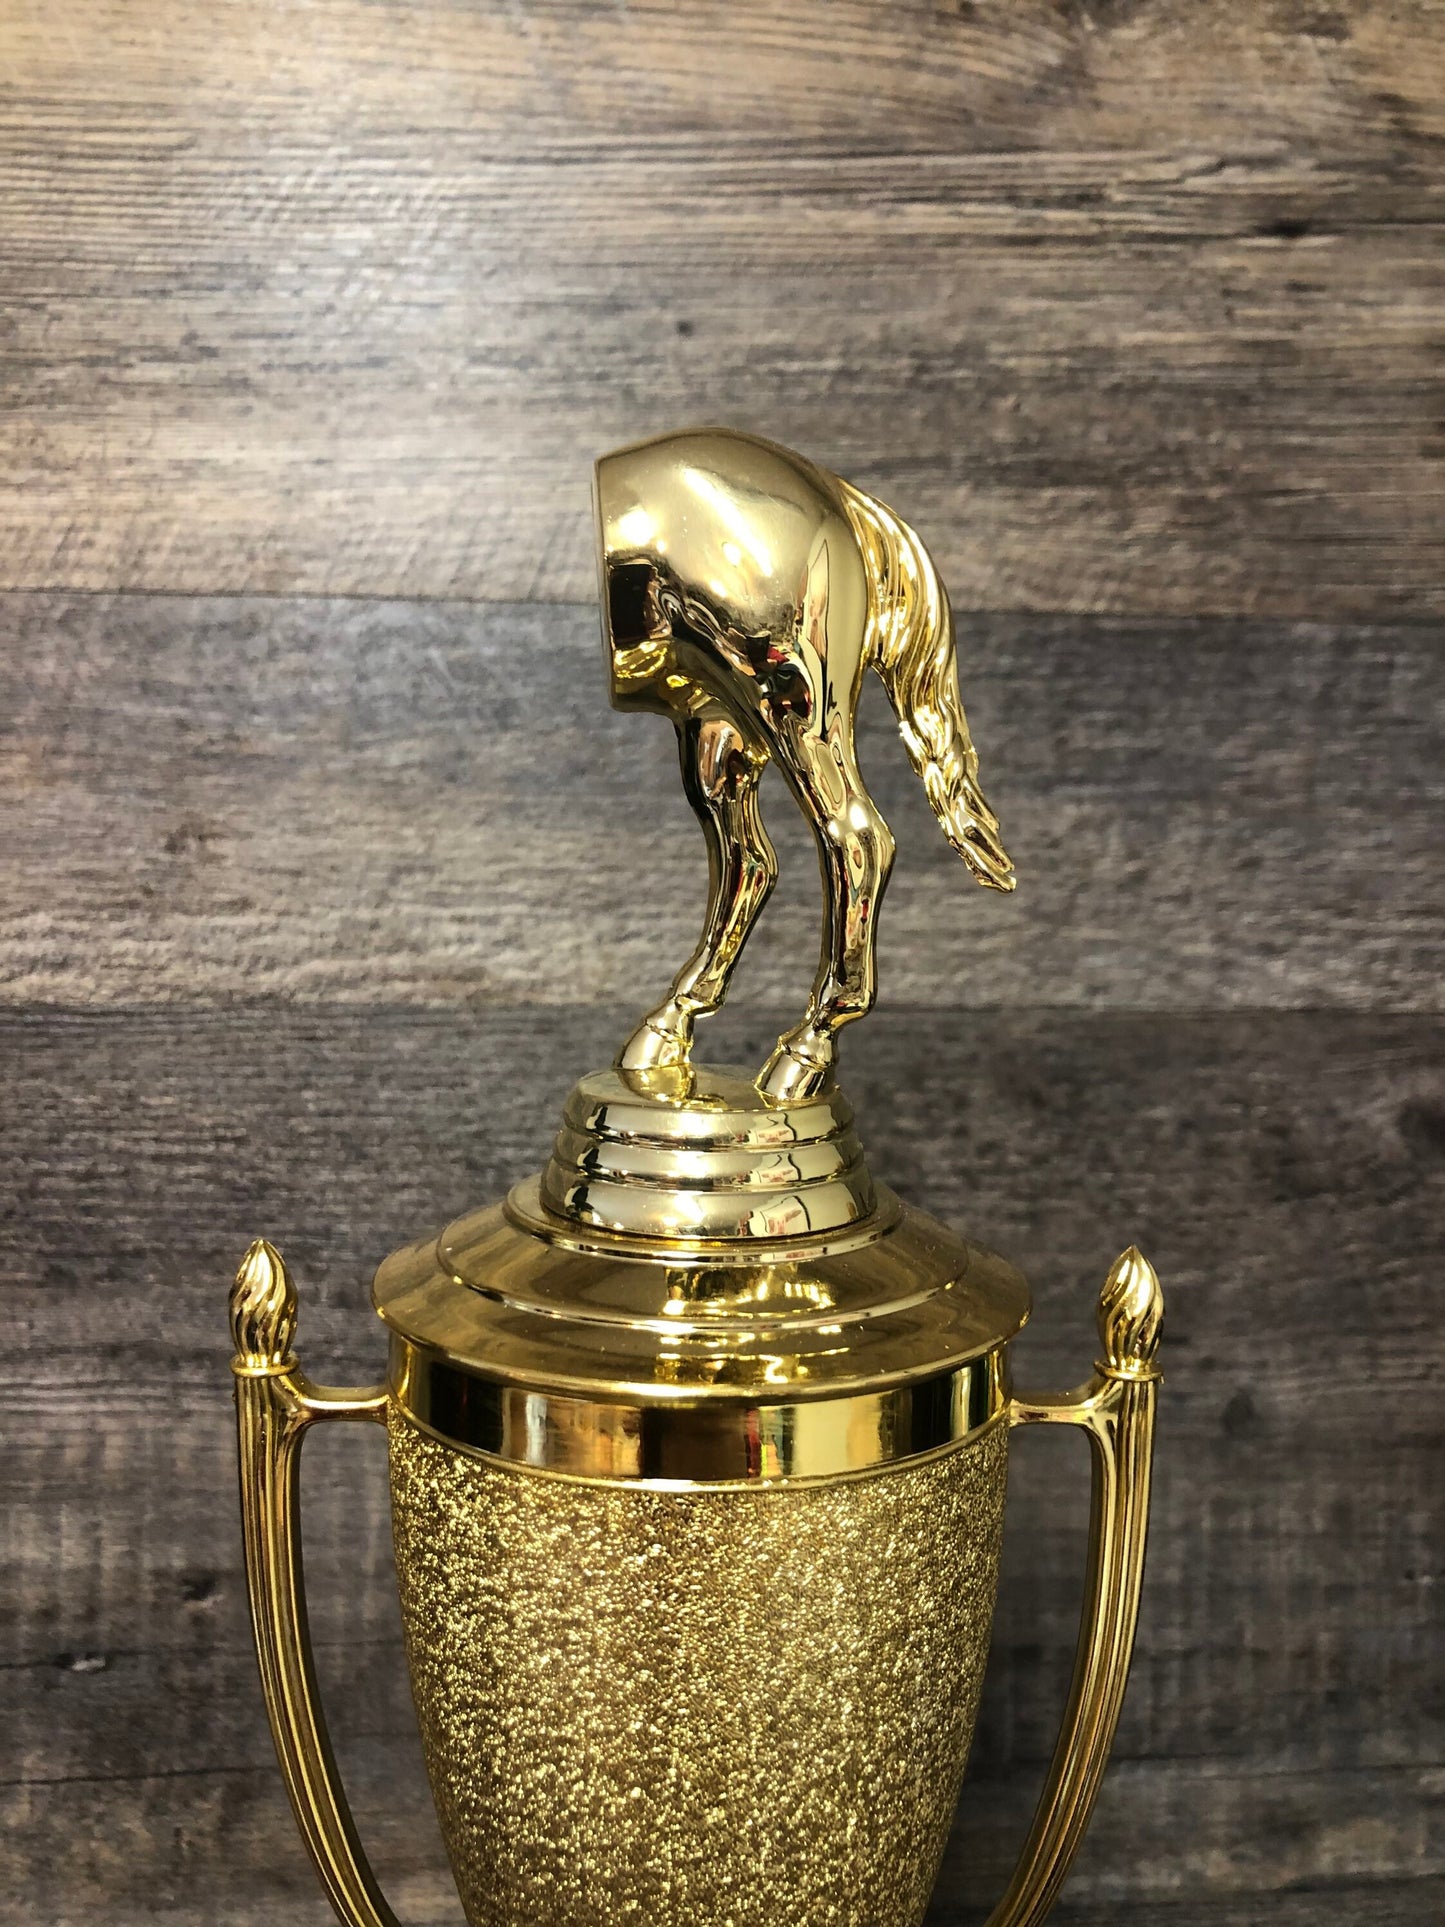 Funny Trophy Biggest Ass Award Jack Ass Trophy Cup Loser Award Adult Humor Gag Gift Biggest Horse's Ass Award Fantasy Football Loser Cup